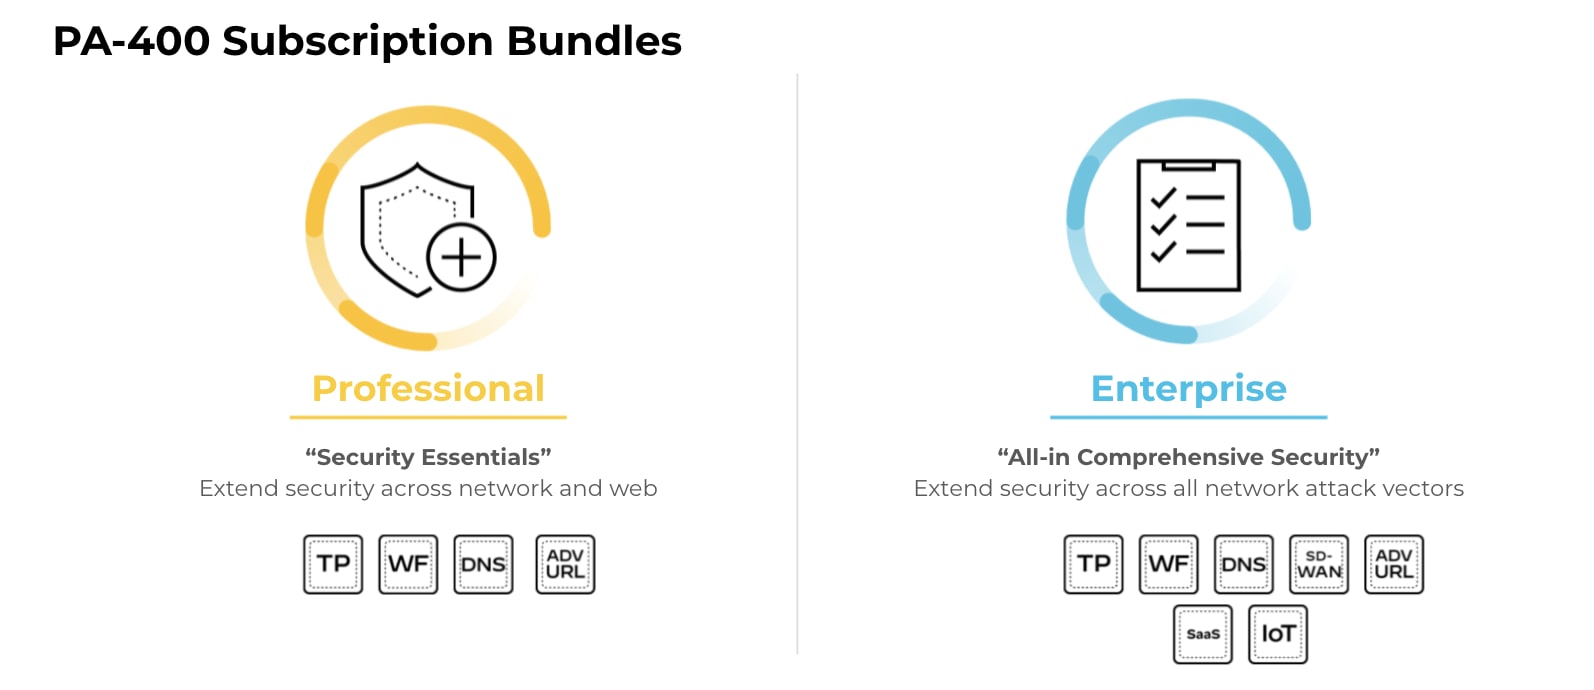 Learn how the PA-400 Subscription Bundles simplify security procurement and improve security effectiveness for distributed enterprises and small offices.